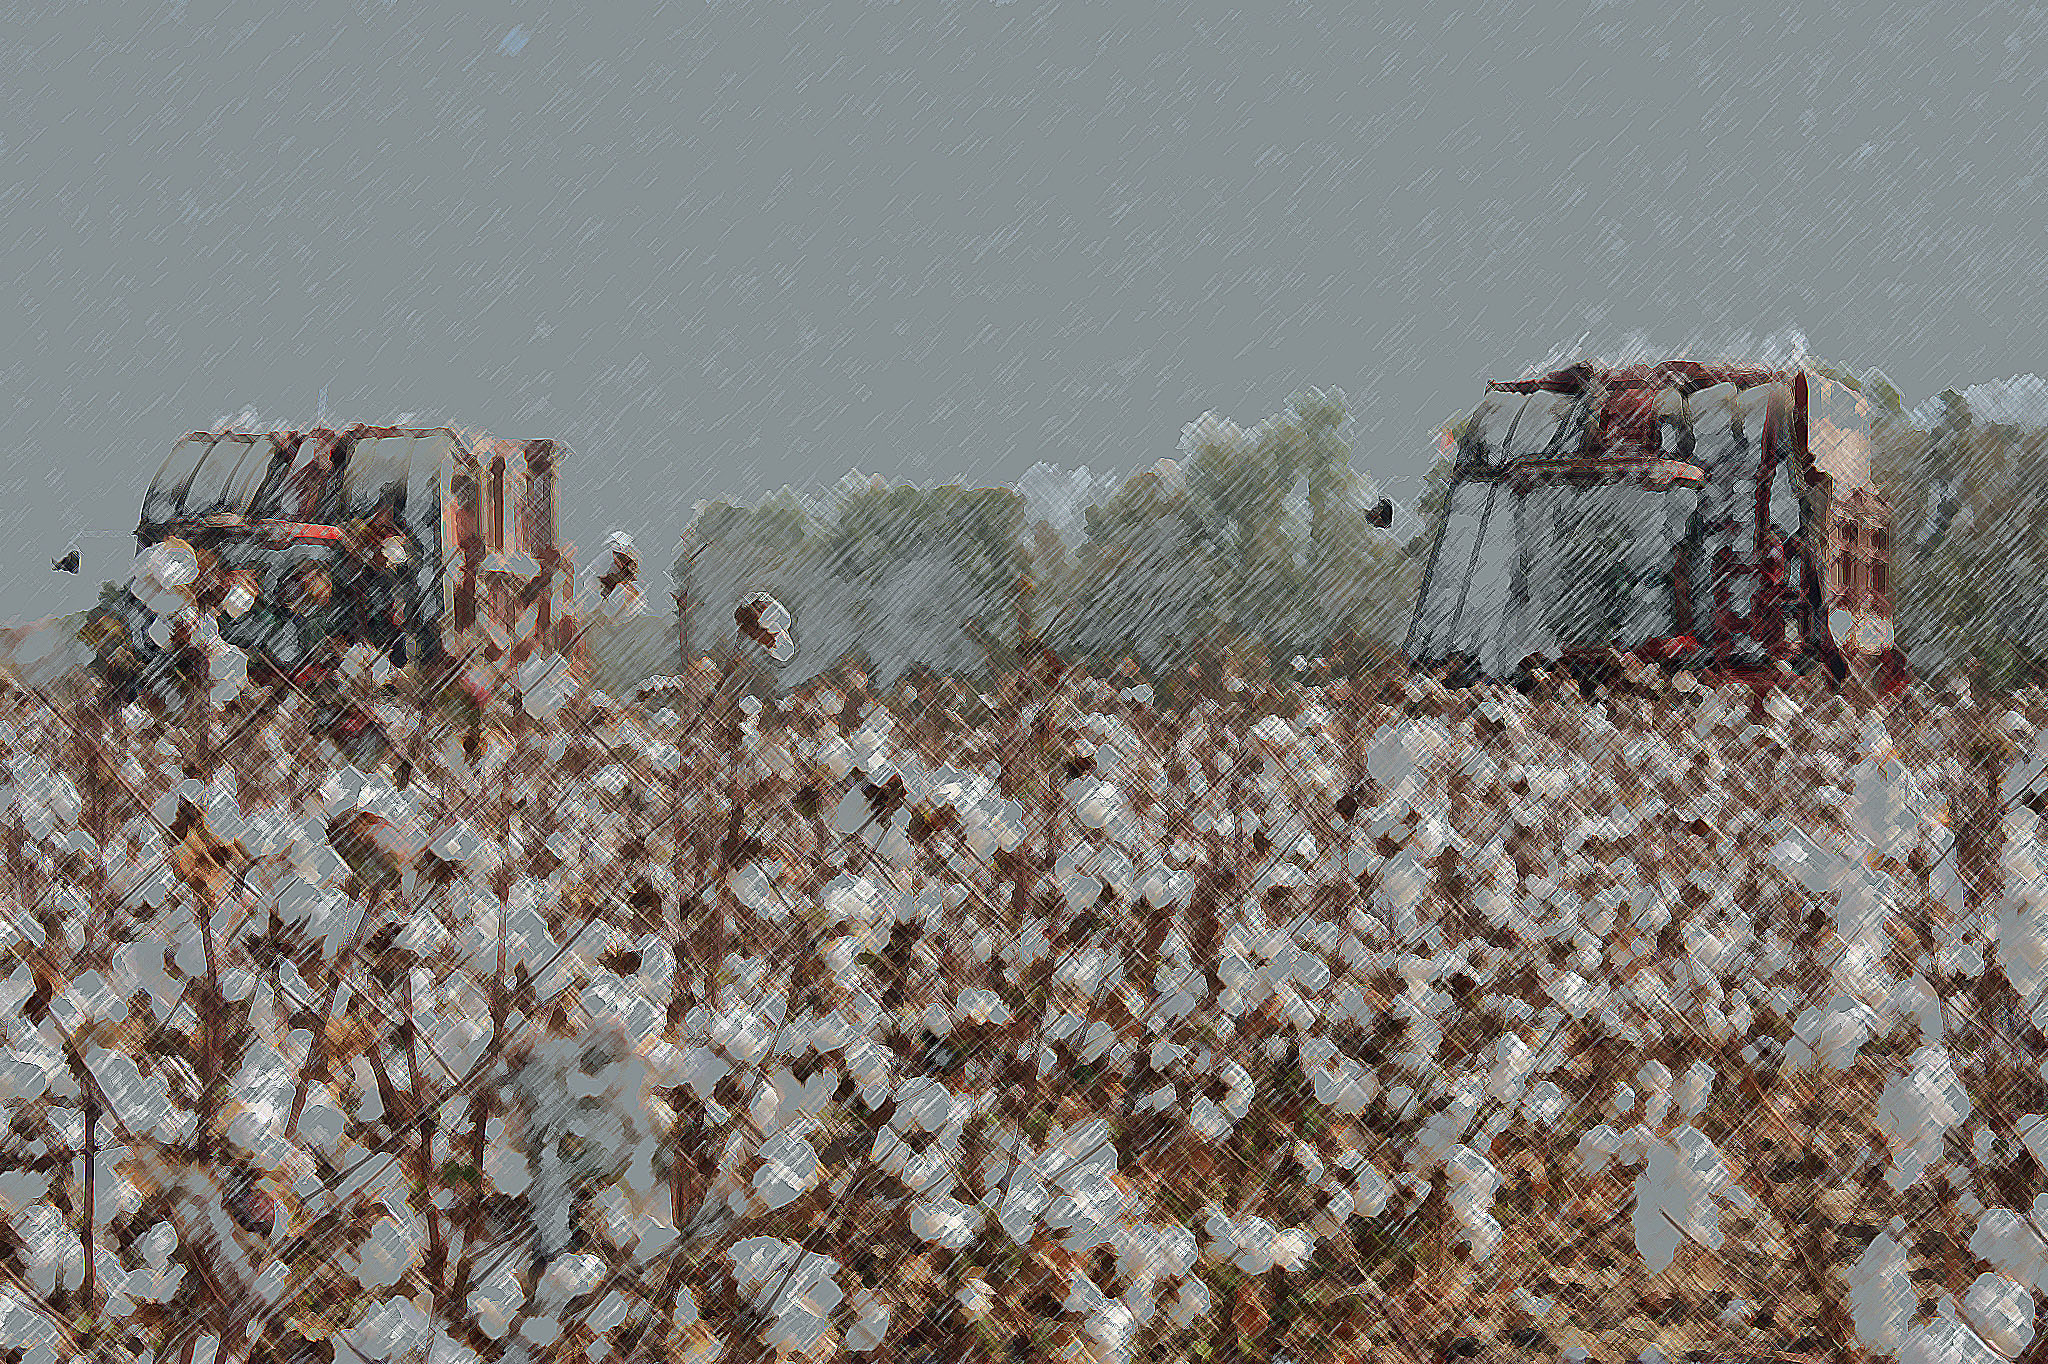 two cotton pickers